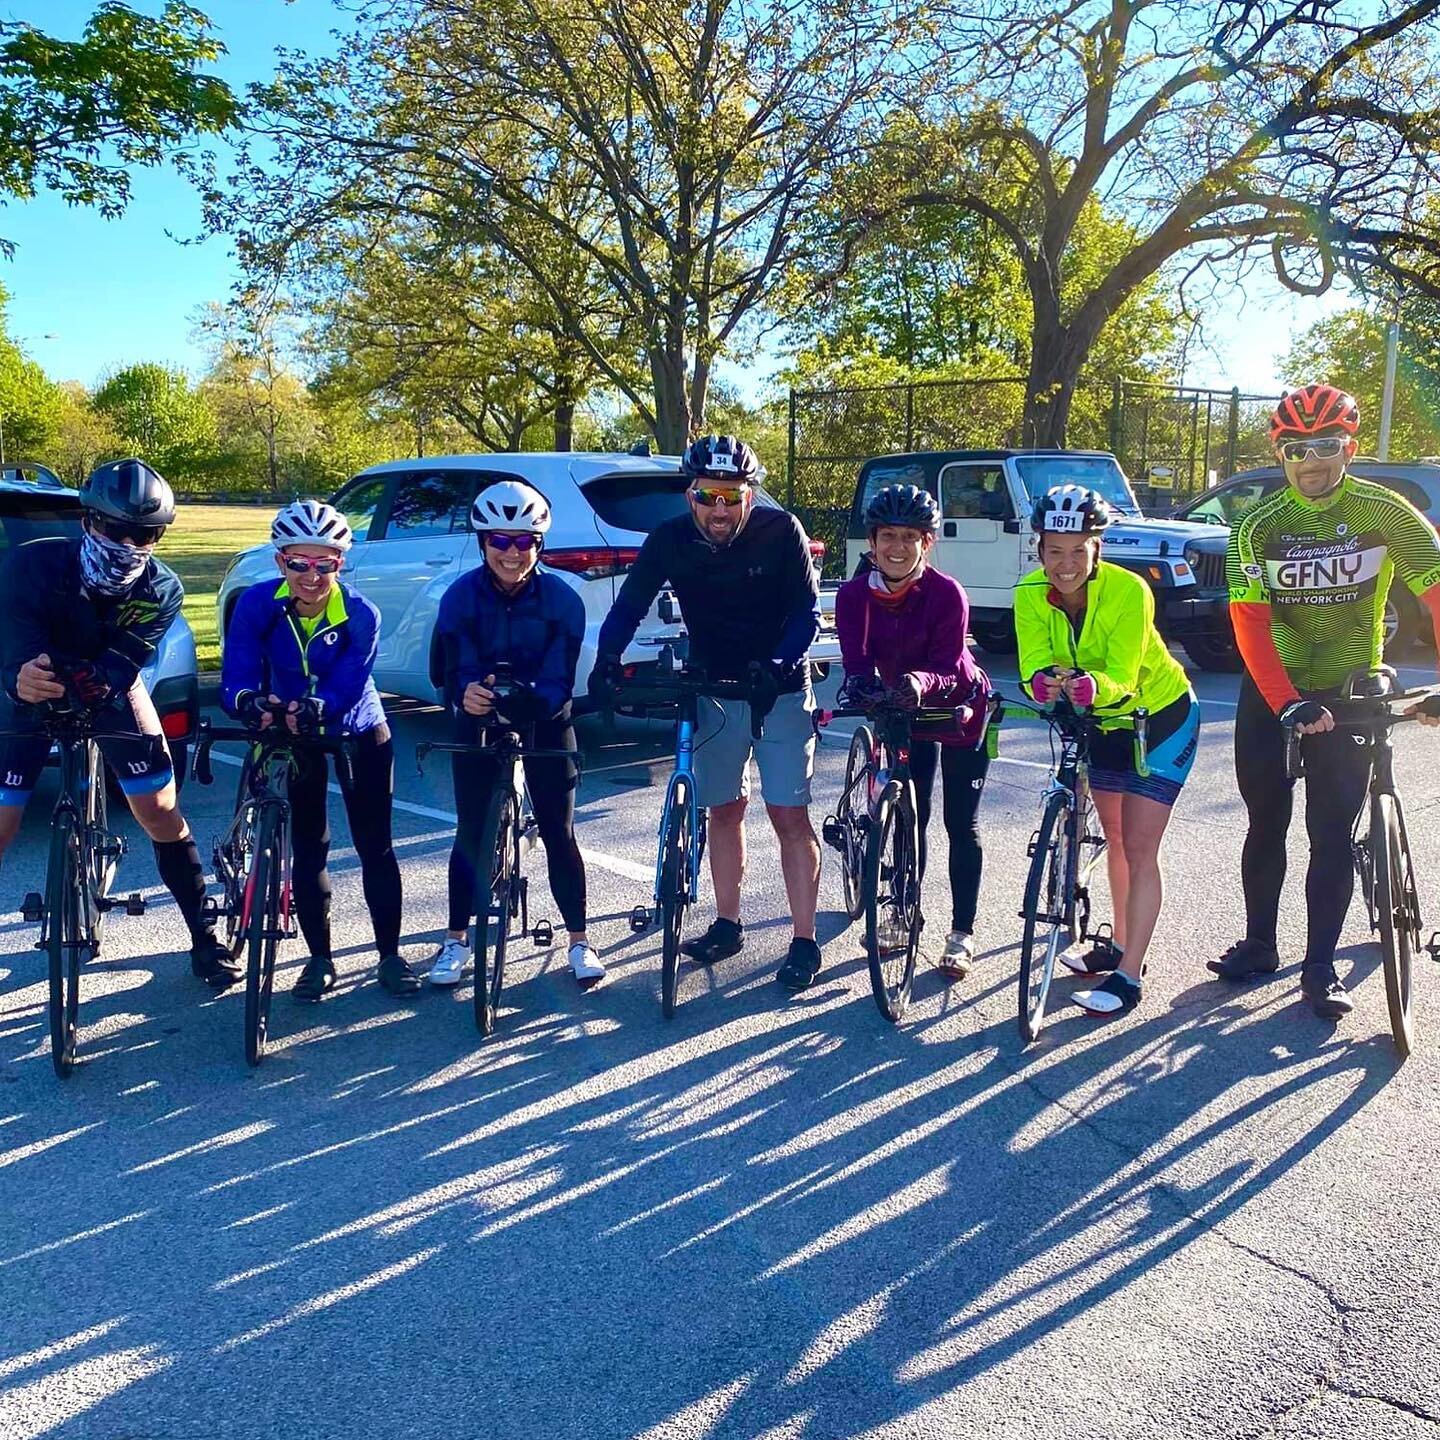 You better buckle up for this Medal Monday &amp; weekend wrap up! This crew was busy CRUSHING it in a LOT of ways. 

Congratulations to our LI Half runners: Laura Quinn, Katie Bell, Louise Senato, Michele Greenfeld, Matthew Scott, Marguerite Macagone